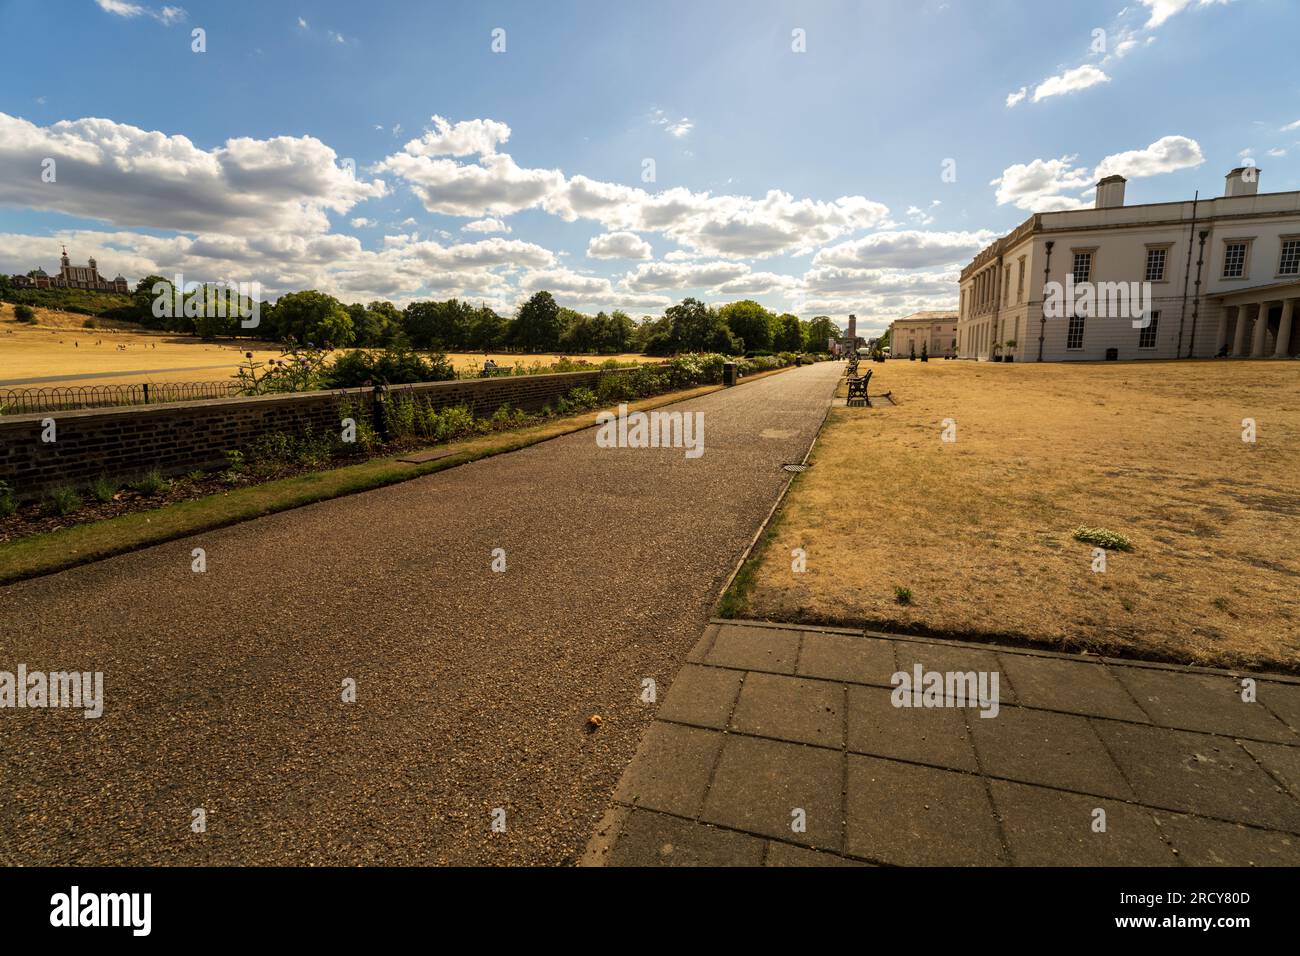 A View o the Royal Observatory from Greenwich Park. Home to Greenwich Mean Time and the Prime Meridian of the world. Greenwich top tourist attraction. Stock Photo